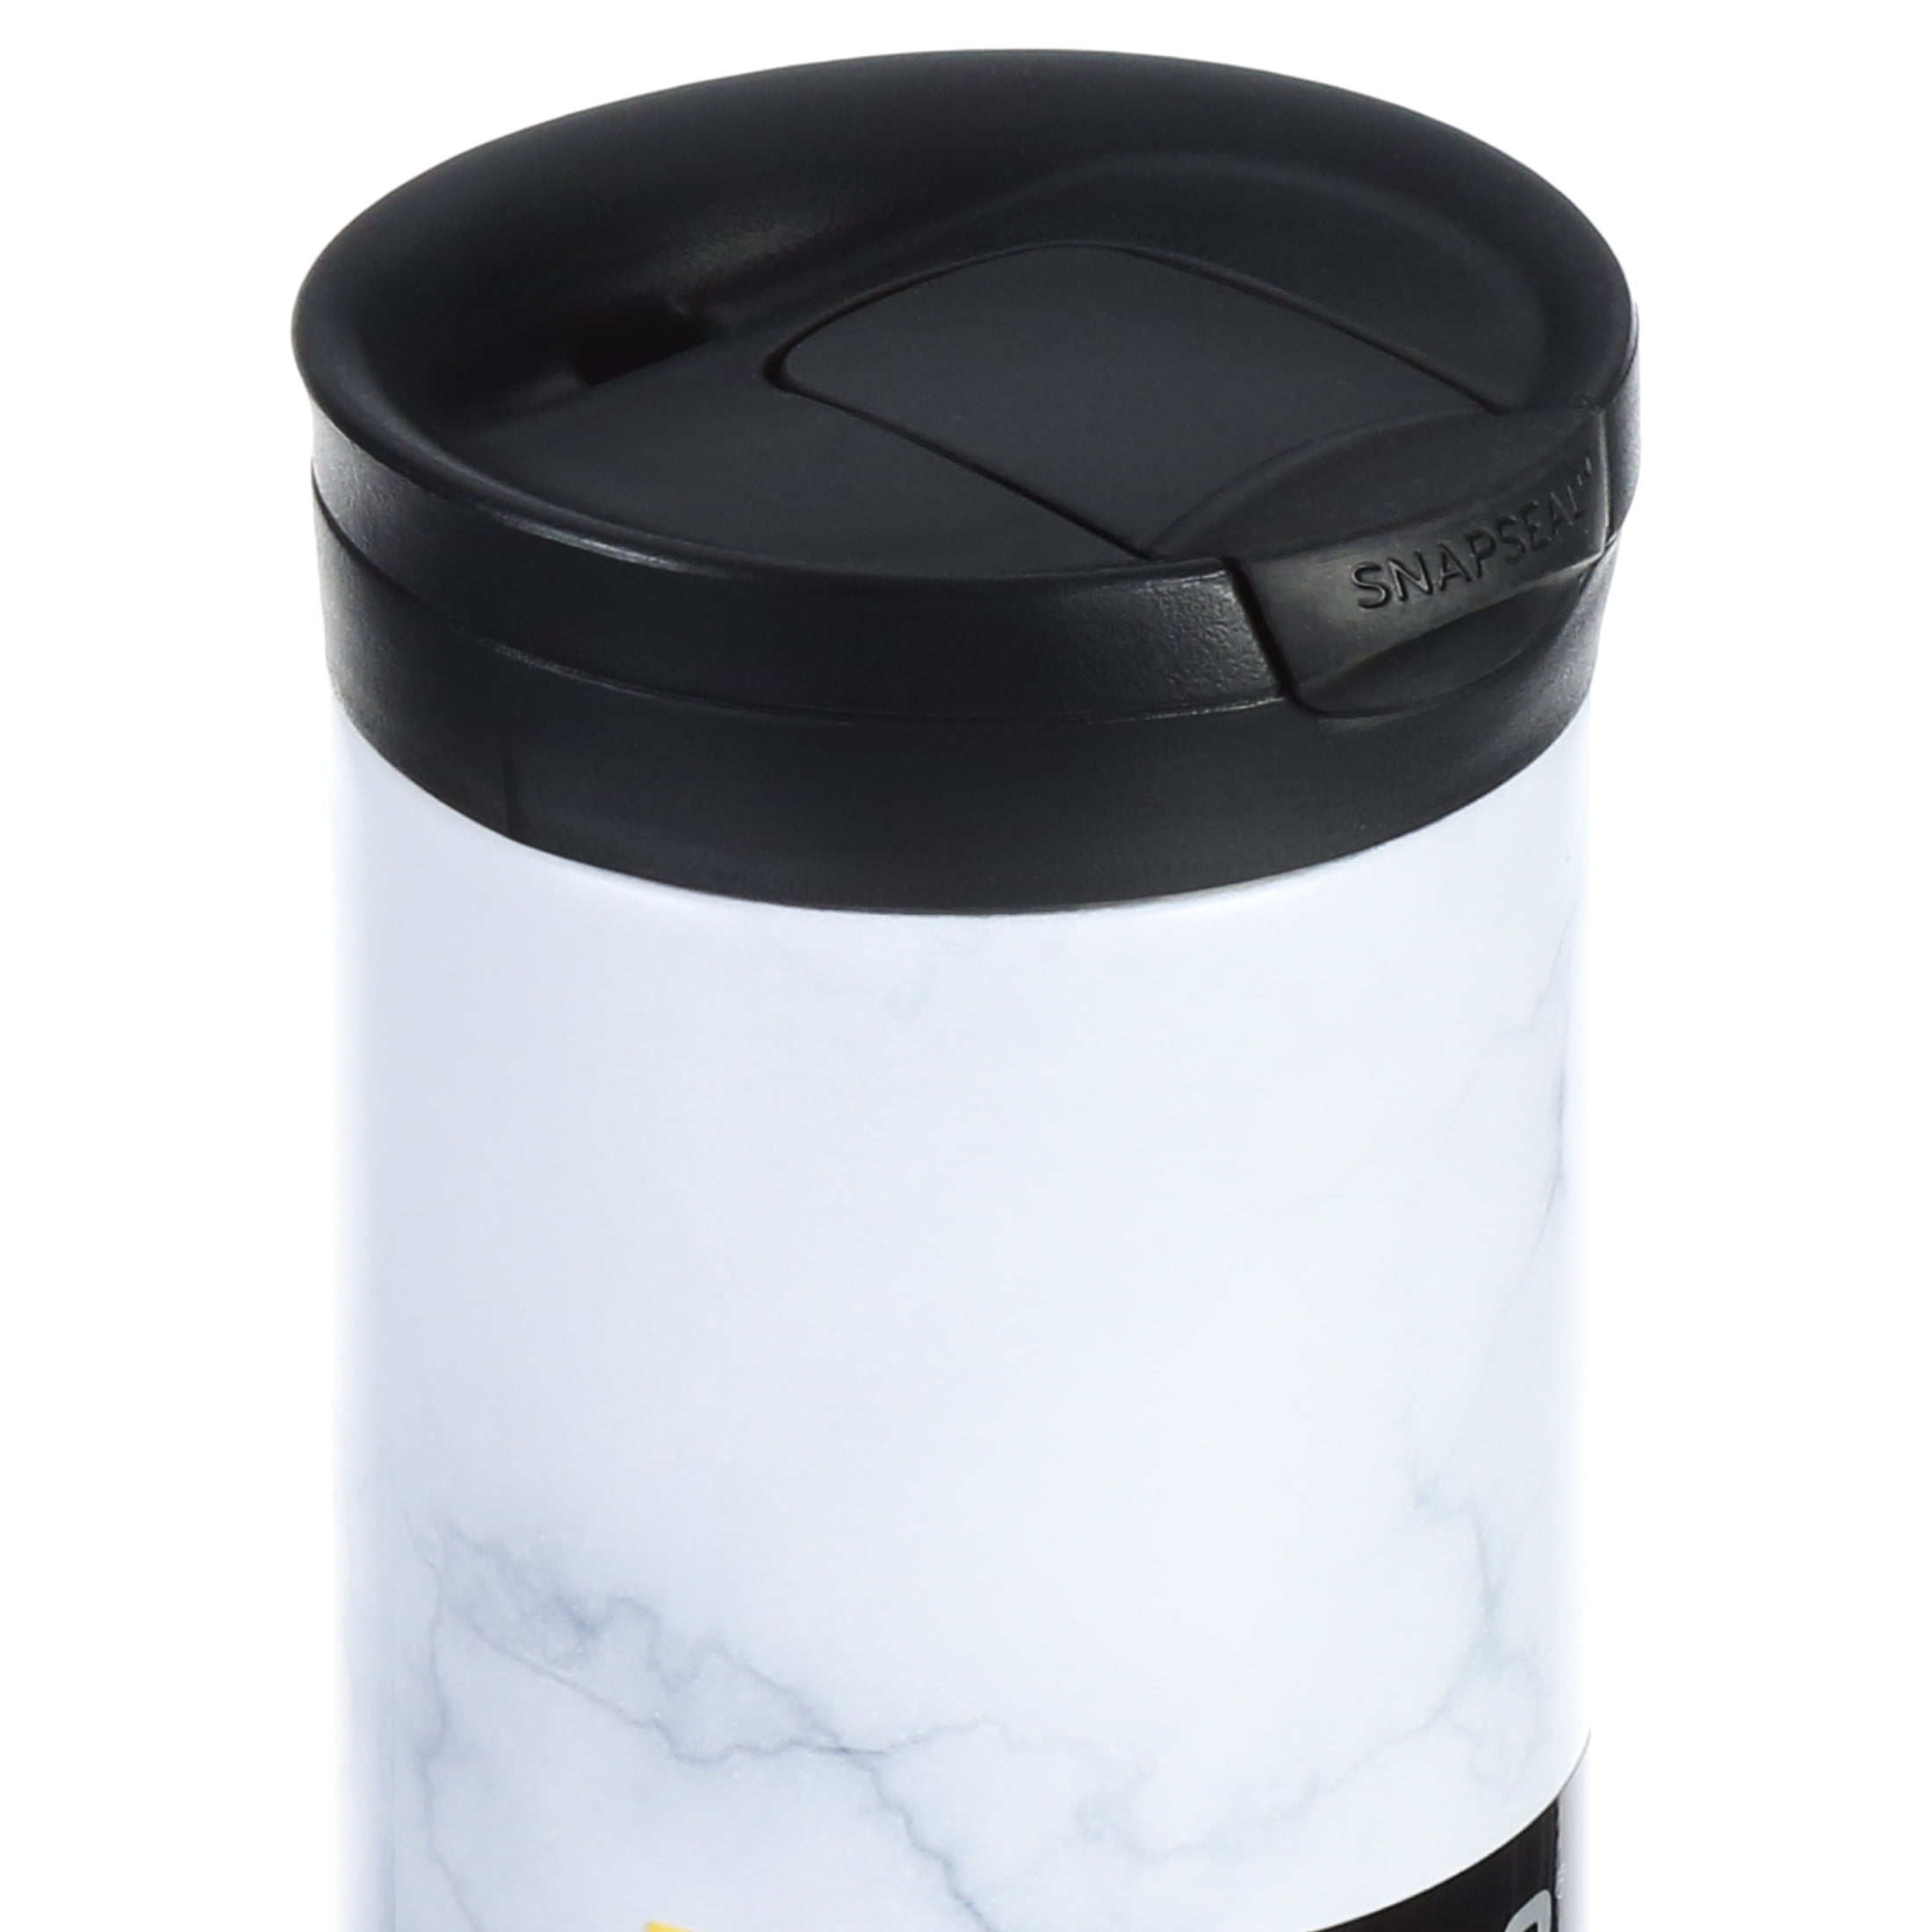 Contigo Couture Stainless Steel Travel Mug with SNAPSEAL Lid Black Shell, 20  fl oz. 